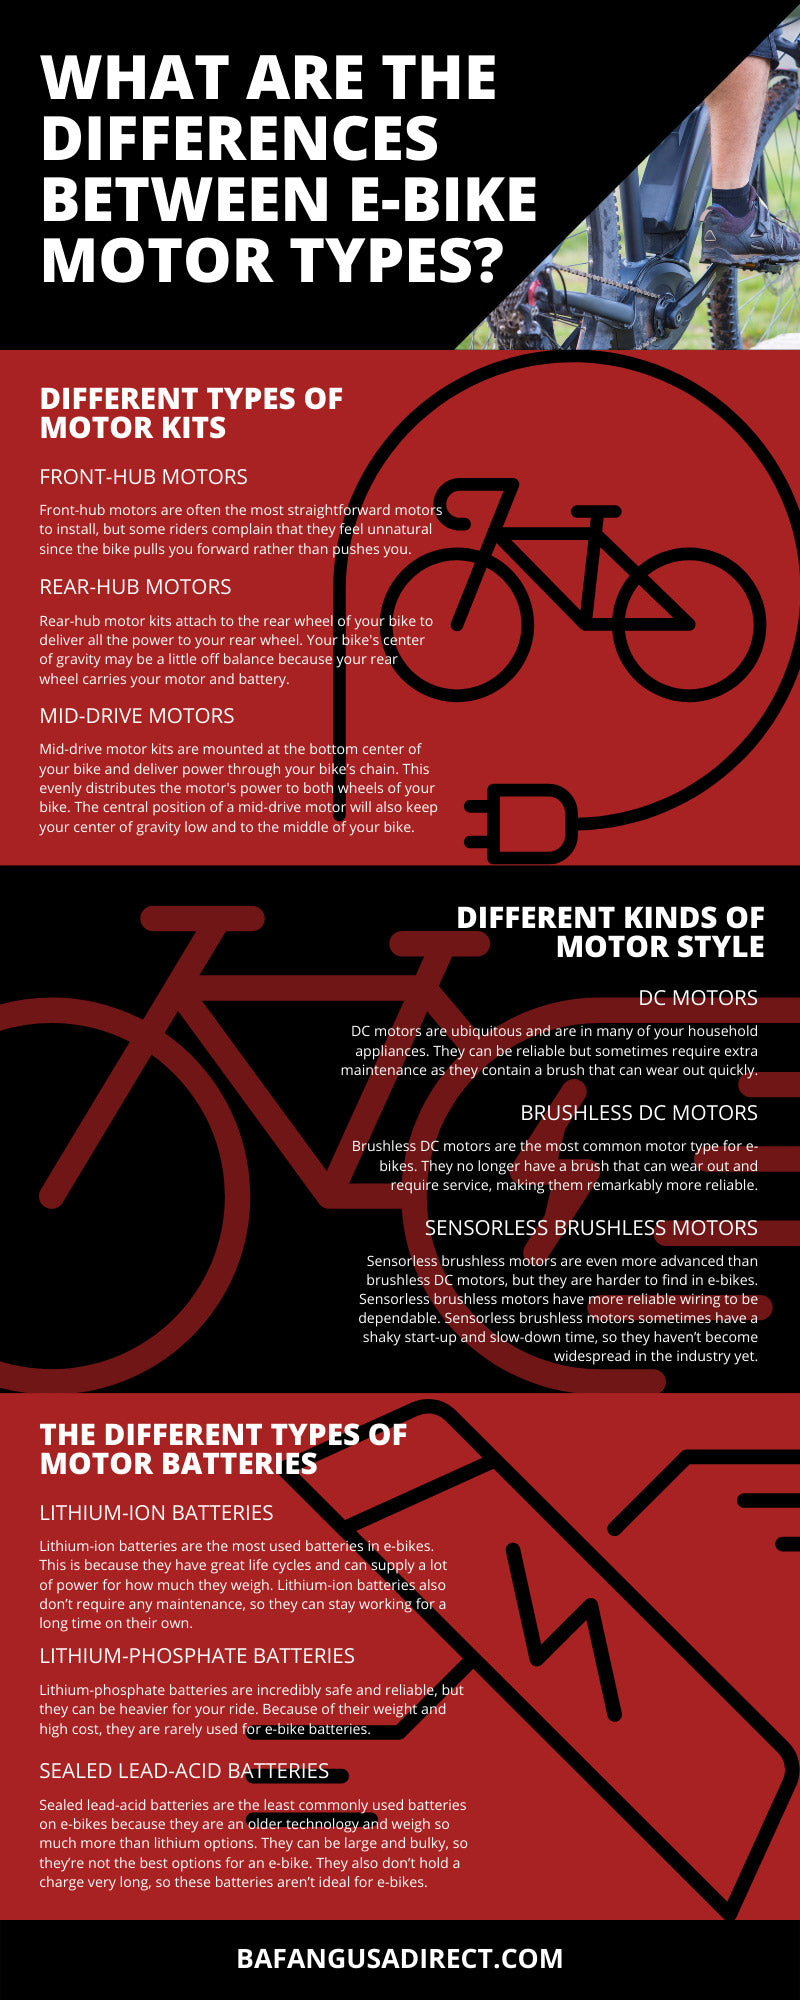 What Are the Differences Between E-bike Motor Types?